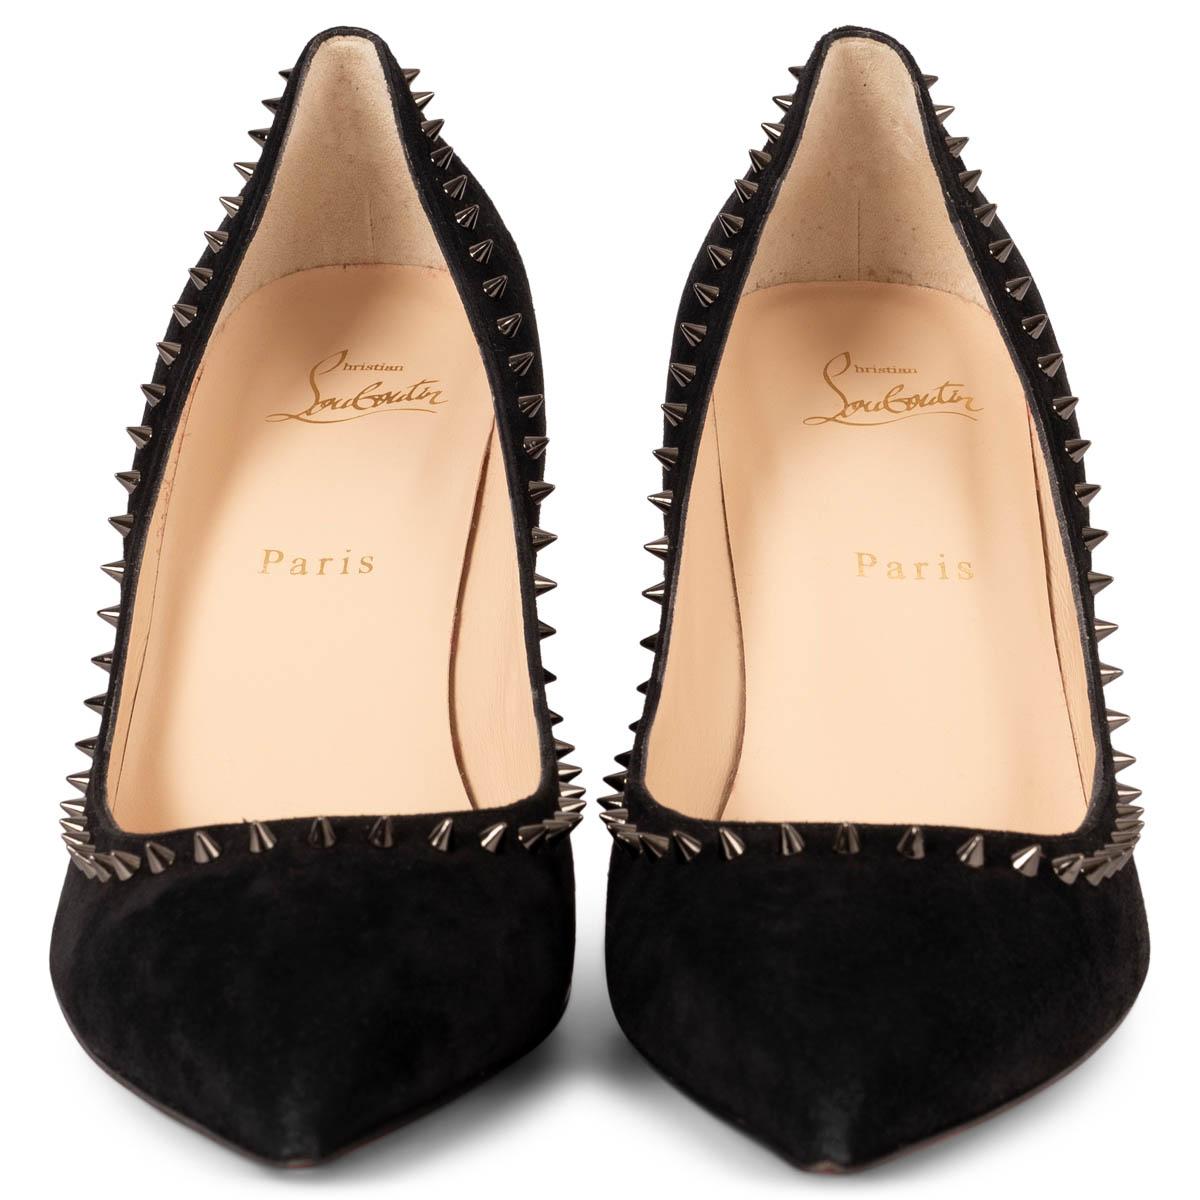 100% authentic Christian Louboutin Anjalina 85 pointed-toe pumps in black suede with gunmetal spikes. Brand new. 

Measurements
Imprinted Size	39.5
Shoe Size	39.5
Inside Sole	26.5cm (10.3in)
Width	7.5cm (2.9in)
Heel	8.5cm